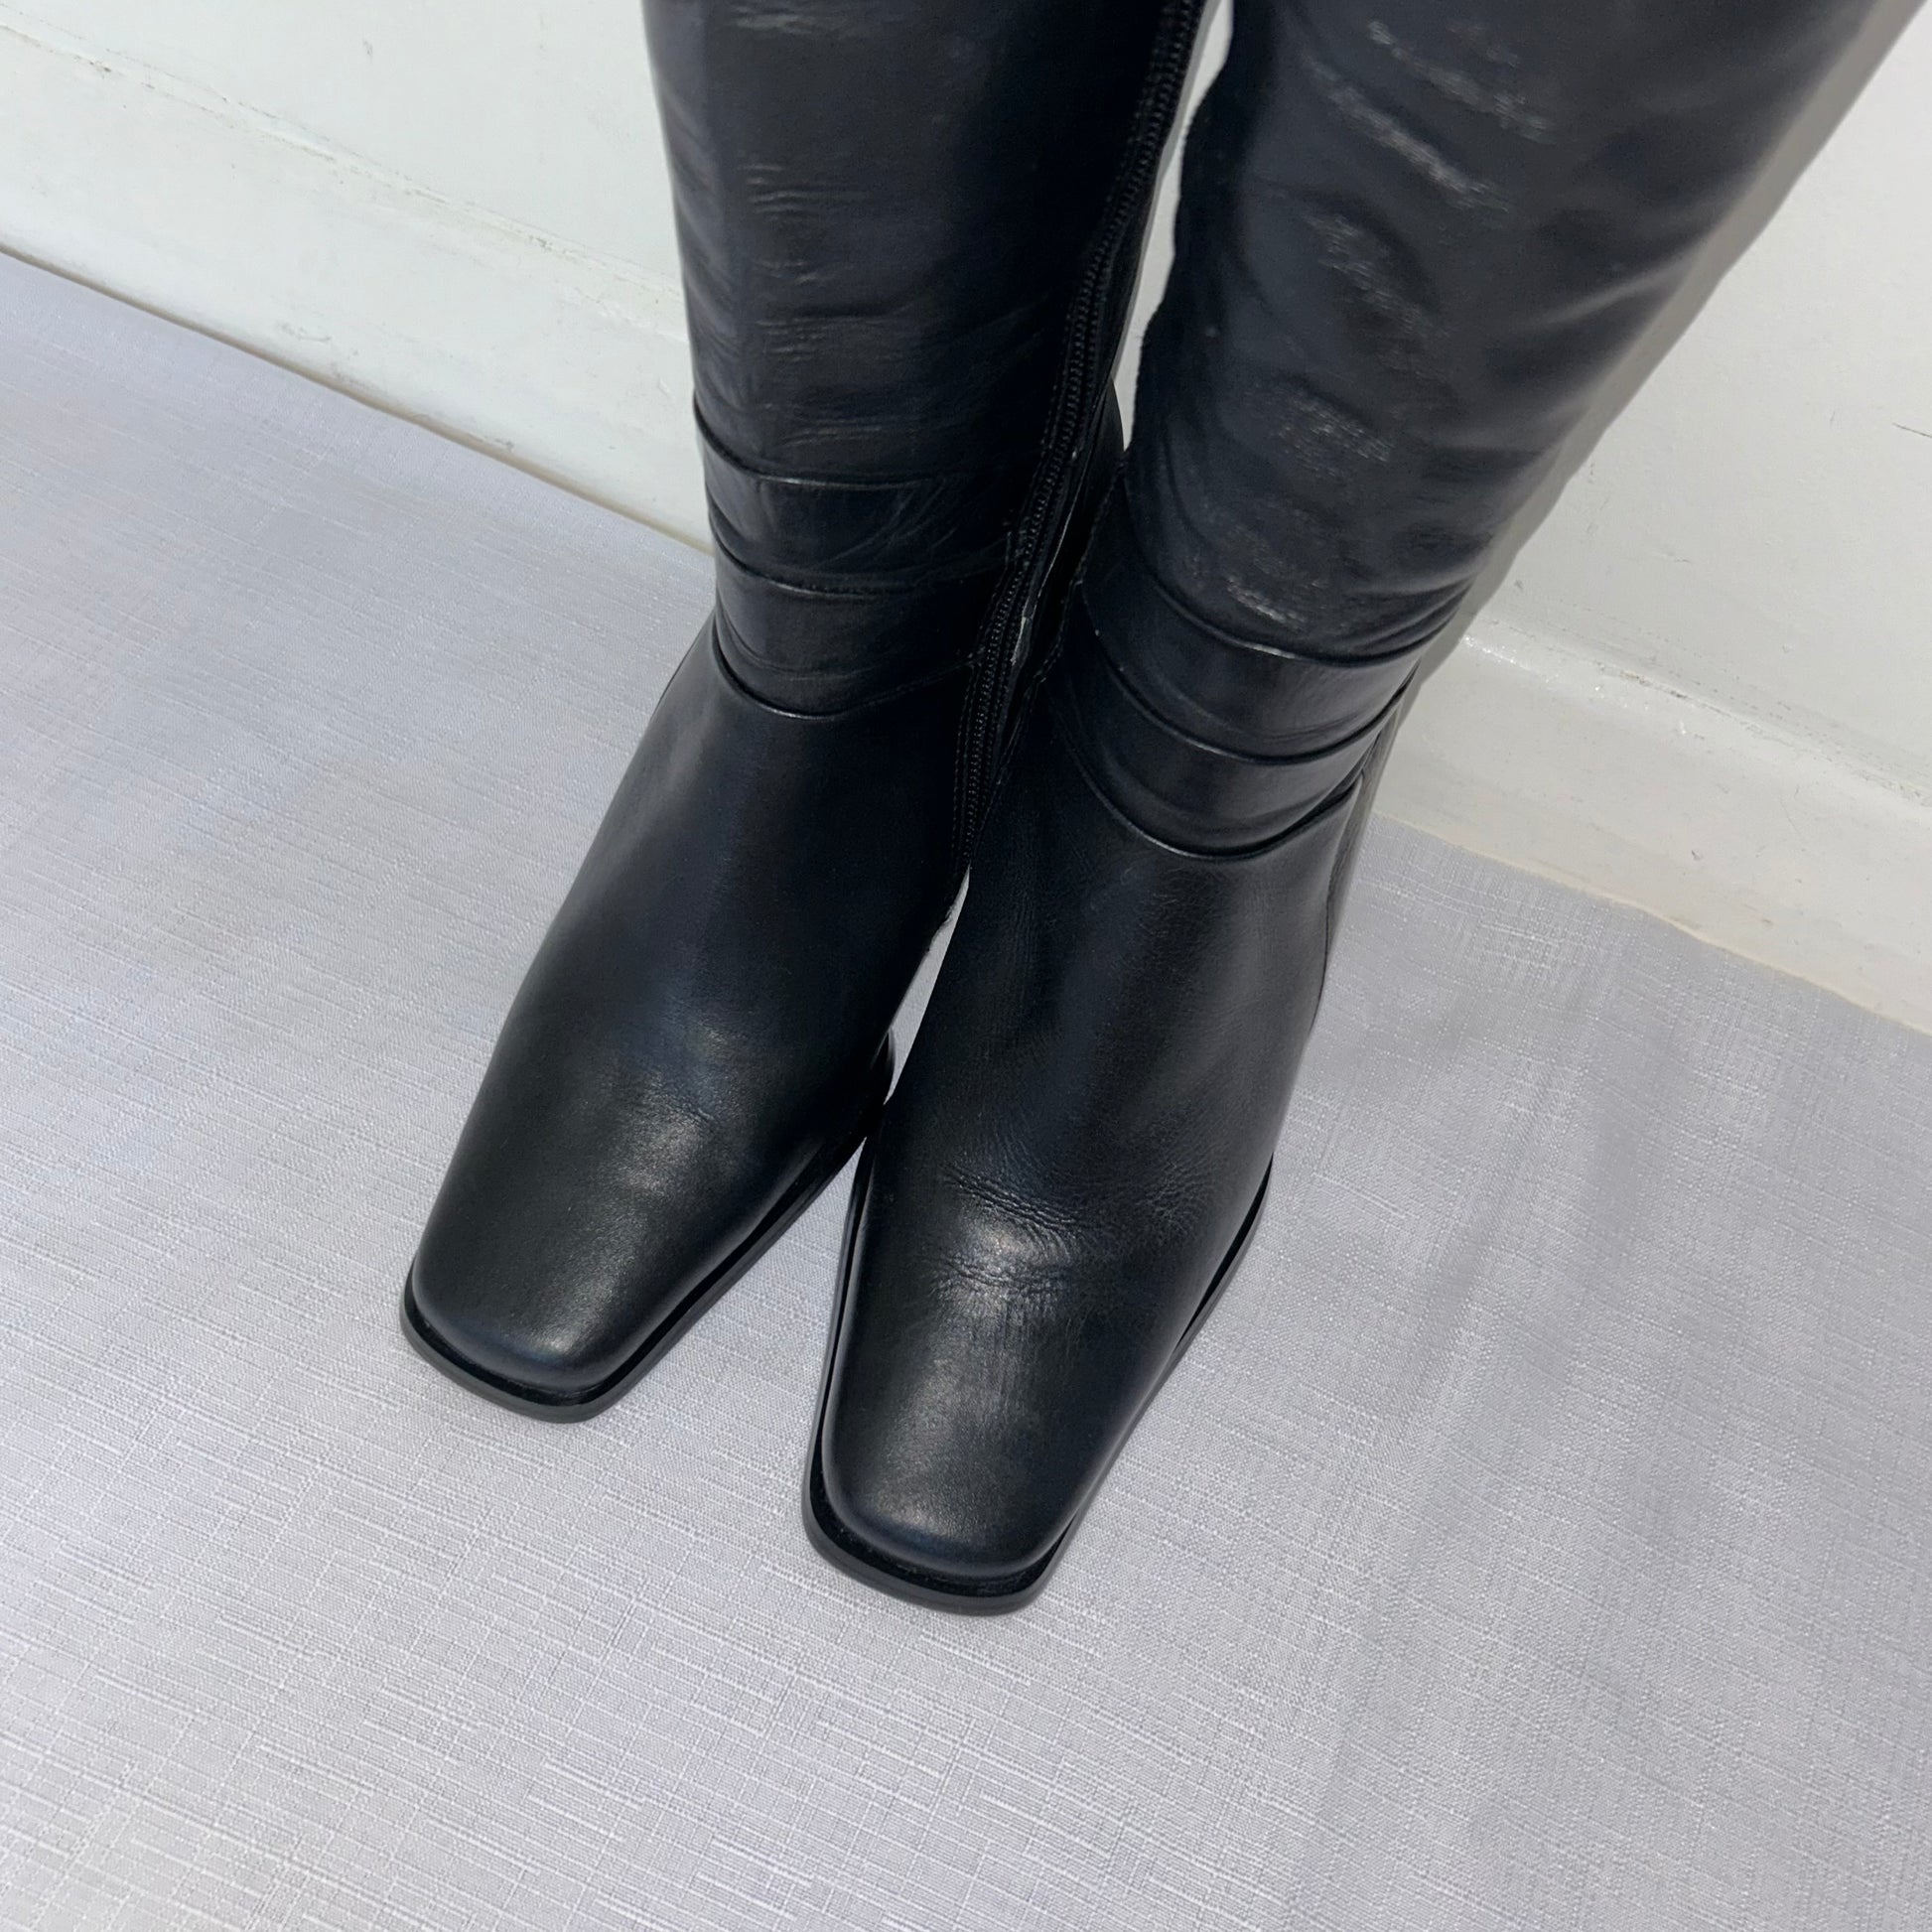 toes of black knee high leather boots on a white background